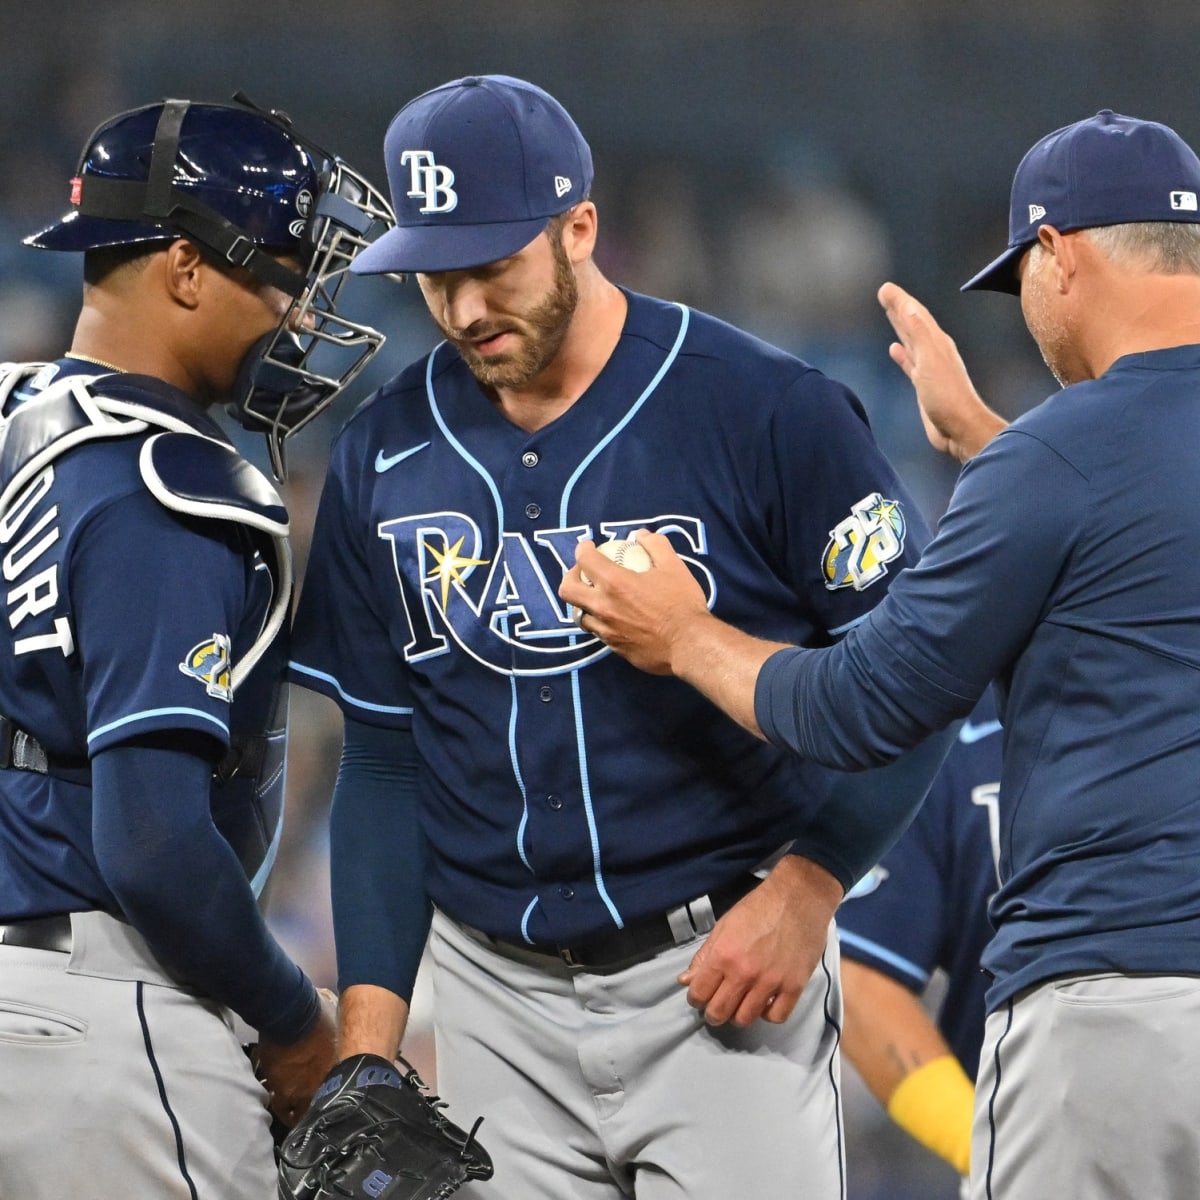 Rays' Record Winning Streak To Open Season Ends With 6-3 Loss at